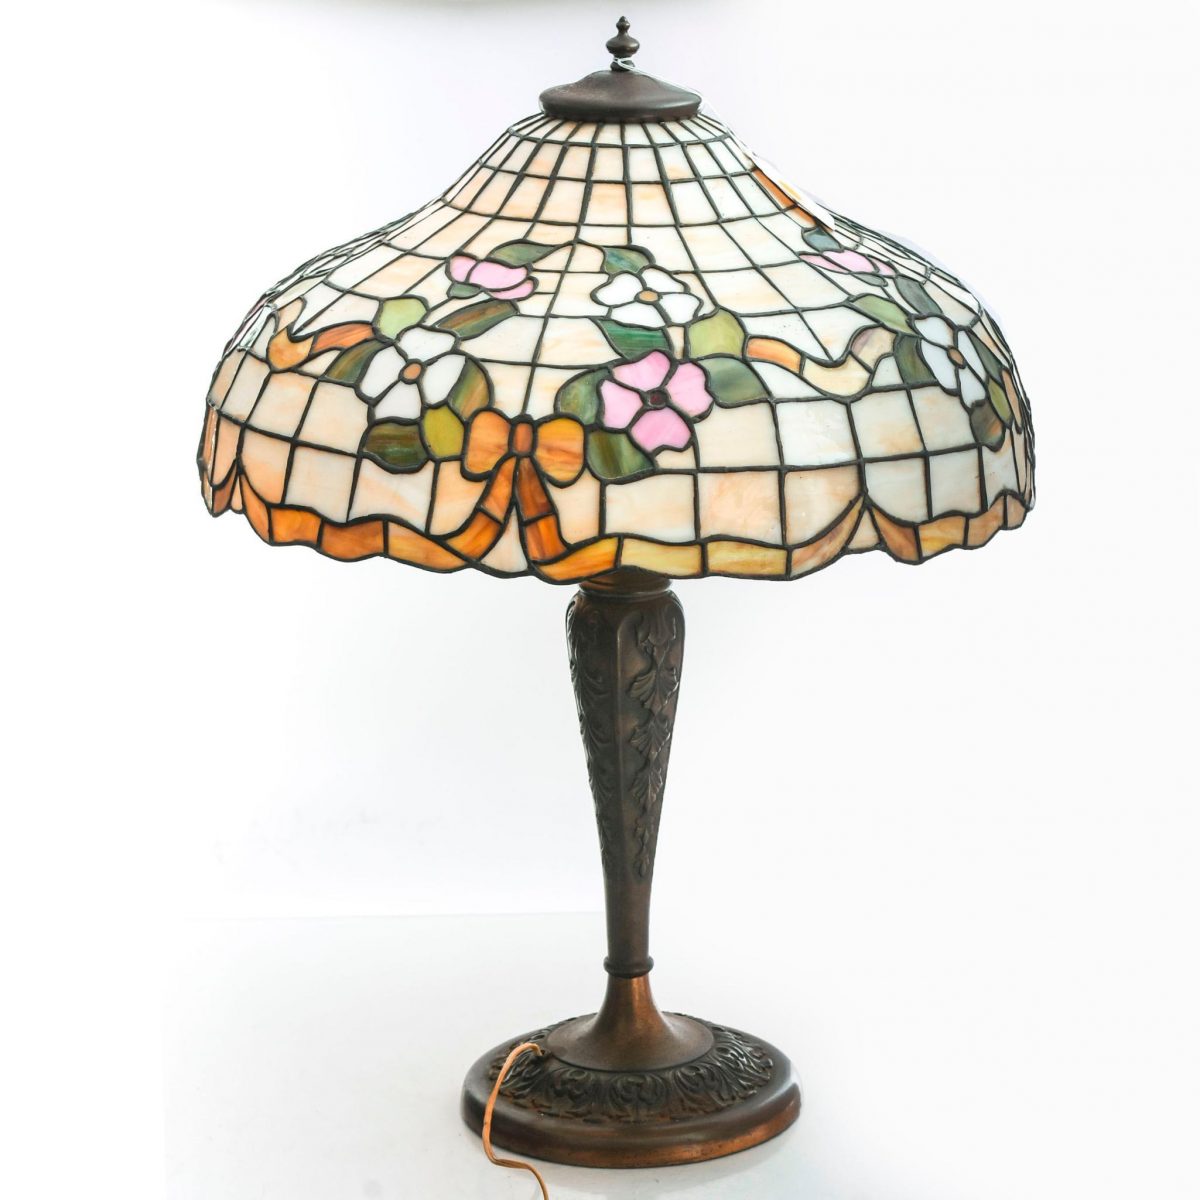 A Tiffany style lamp with bows in orange, pink, green and white colored glass.